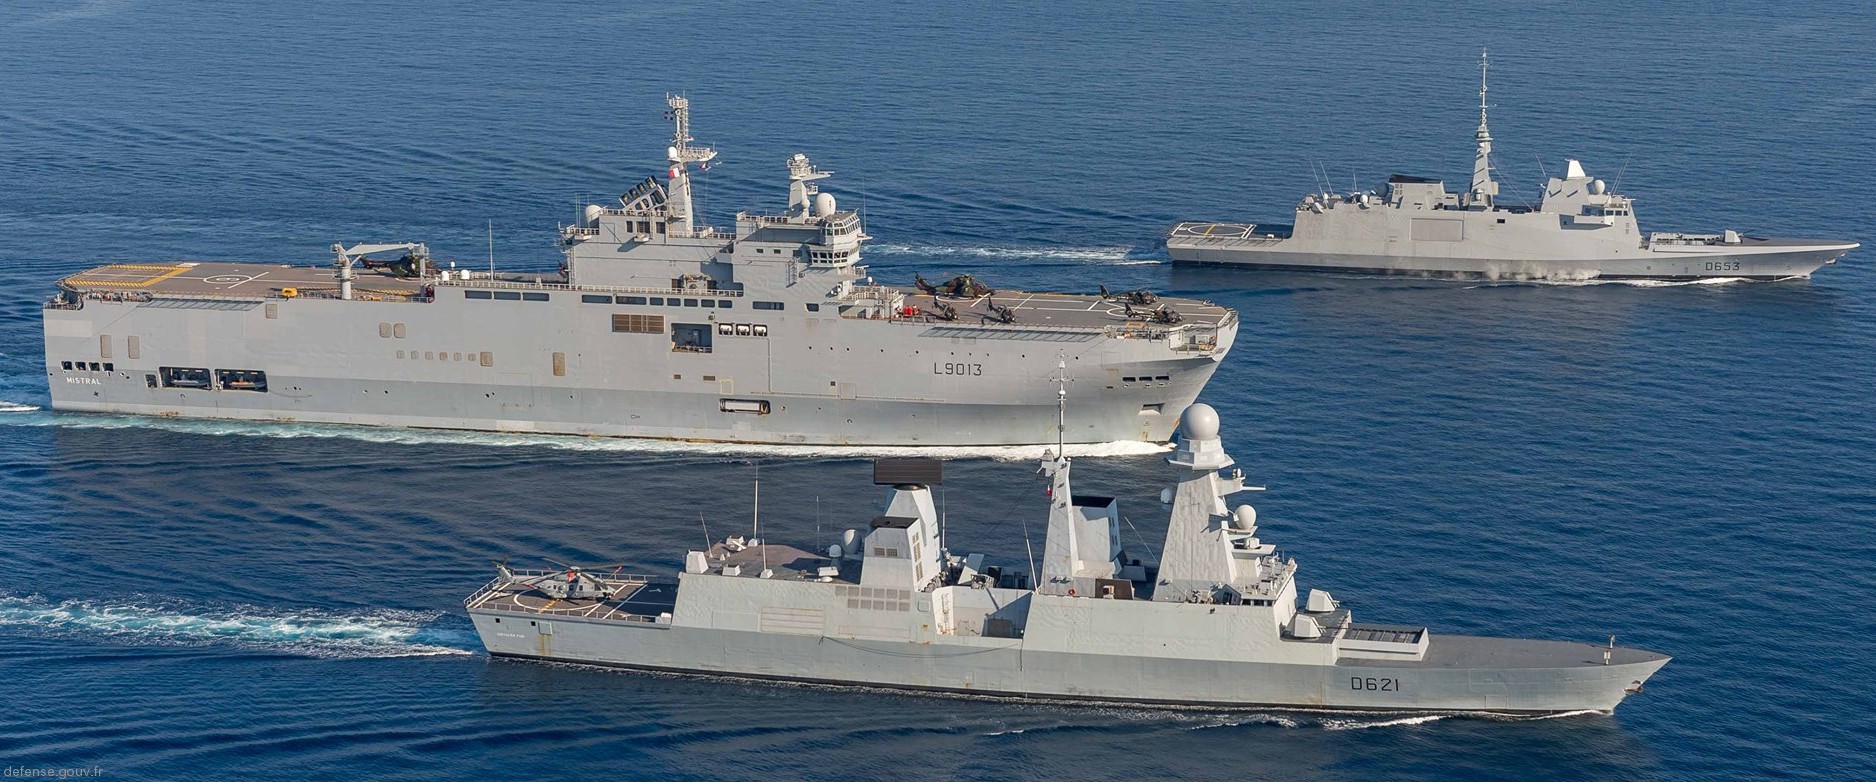 l-9013 fs mistral amphibious assault command ship french navy marine nationale 19